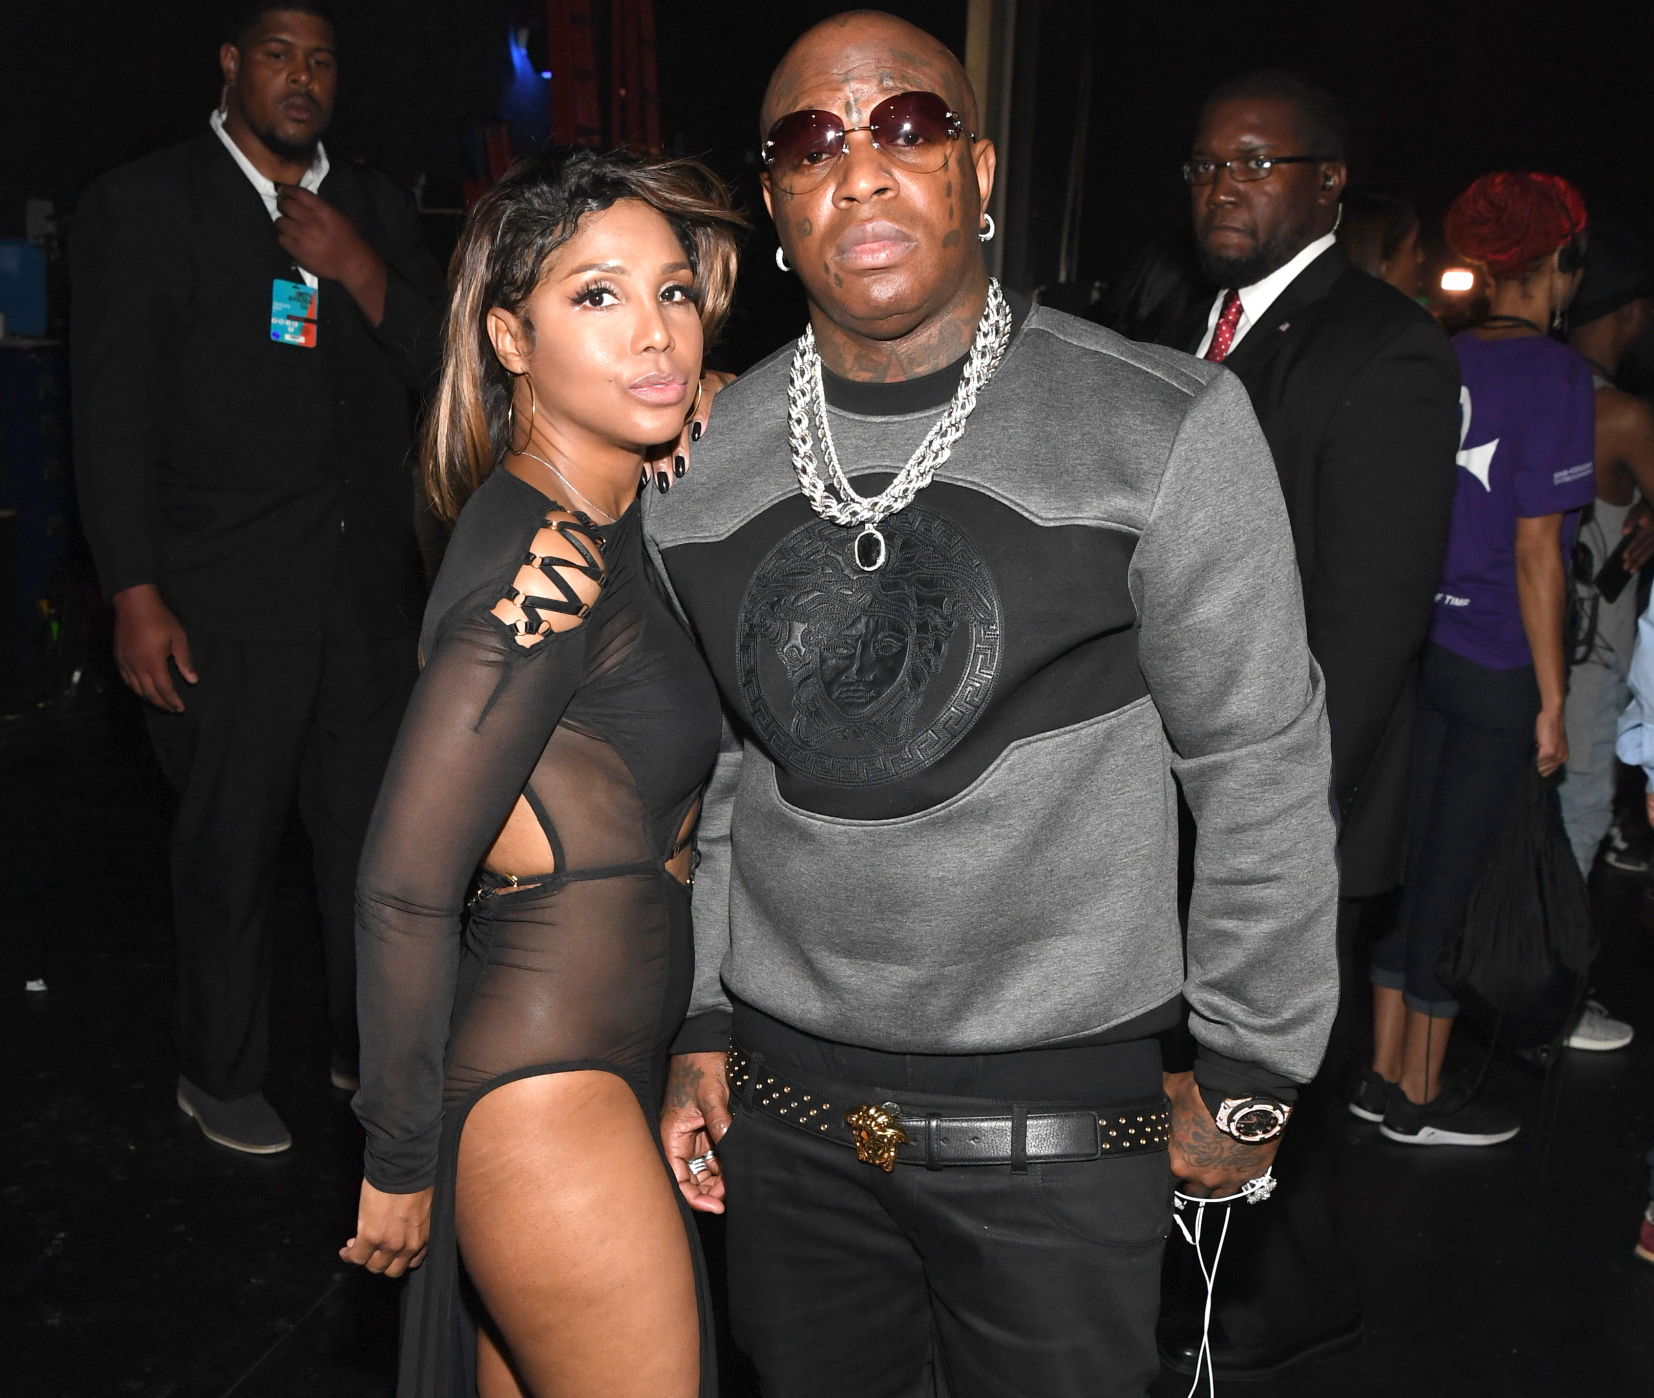 LOS ANGELES, CA - JUNE 26: Singer Toni Braxton (L) and recording artists Birdman attend the 2016 BET Awards at the Microsoft Theater on June 26, 2016 in Los Angeles, California. (Photo by Paras Griffin/BET/Getty Images for BET)